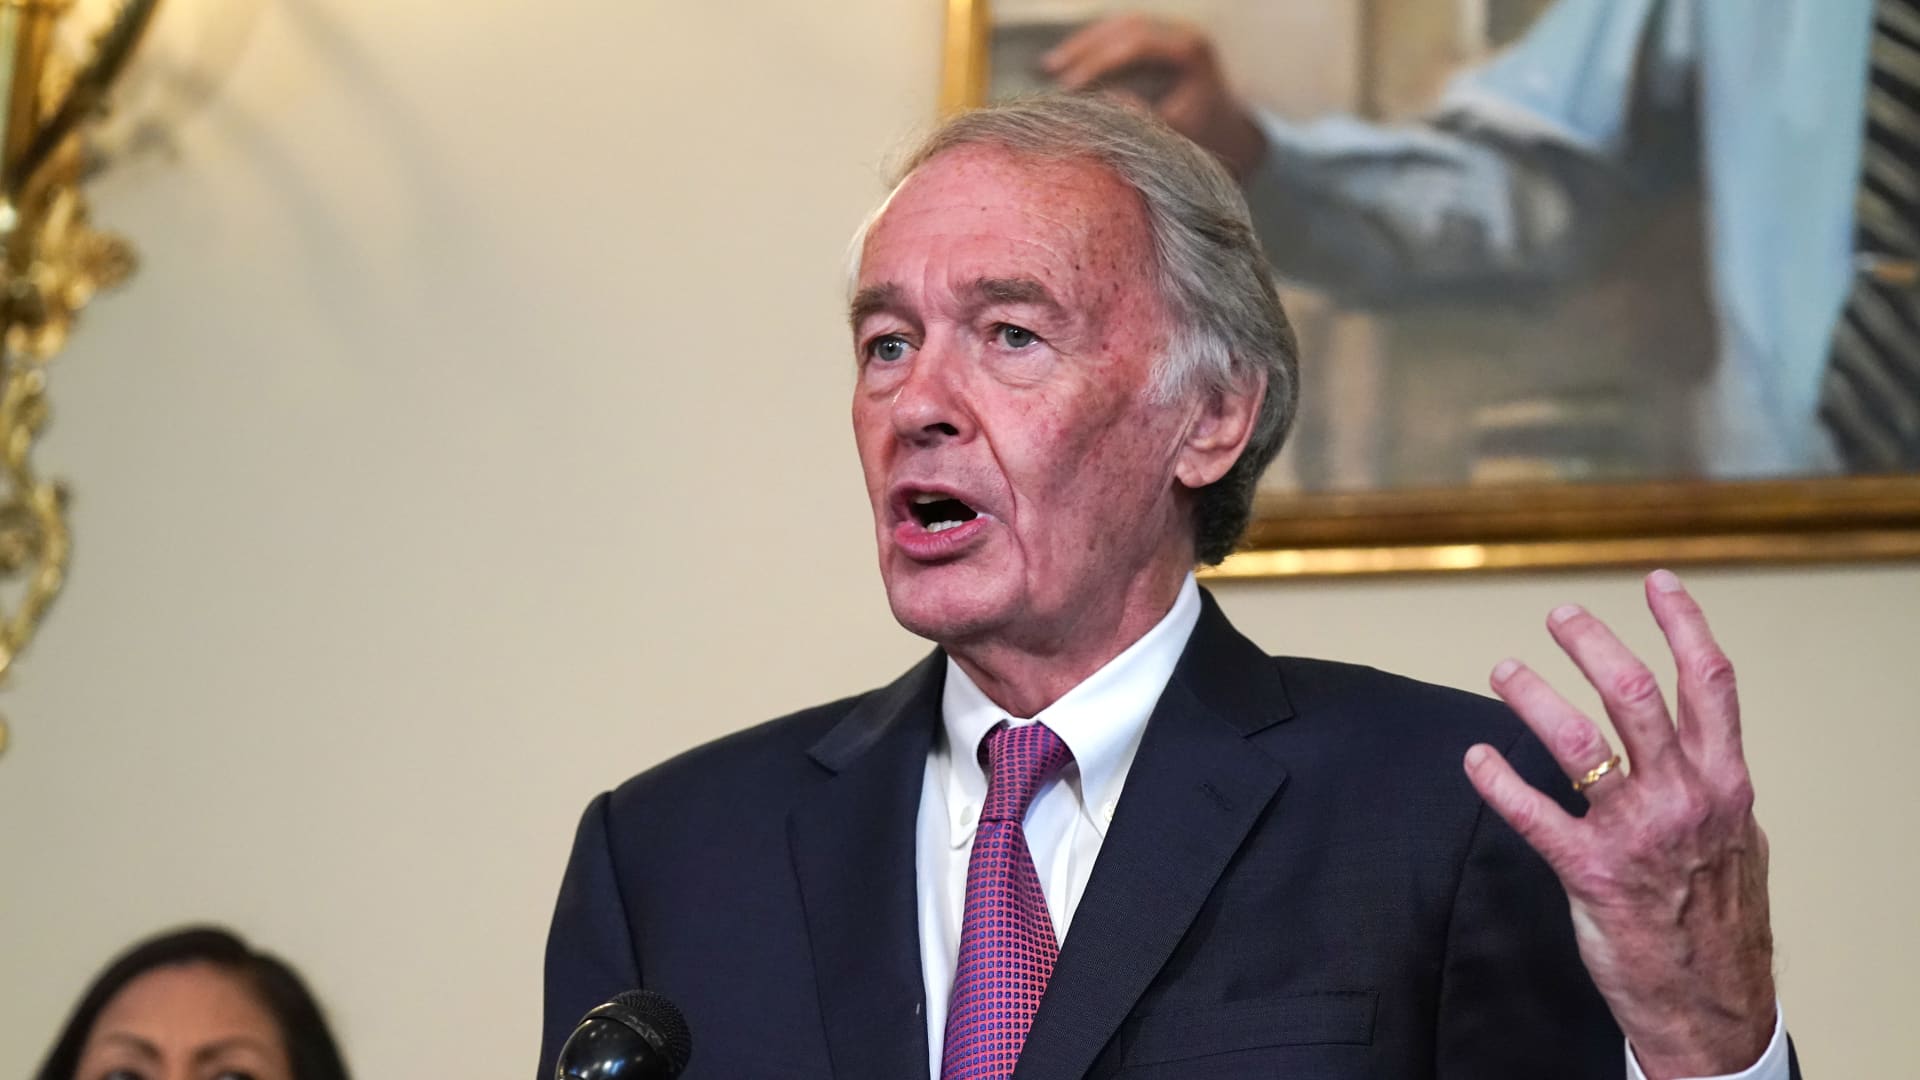 Sen. Markey demands answers from Musk on Twitter imposters